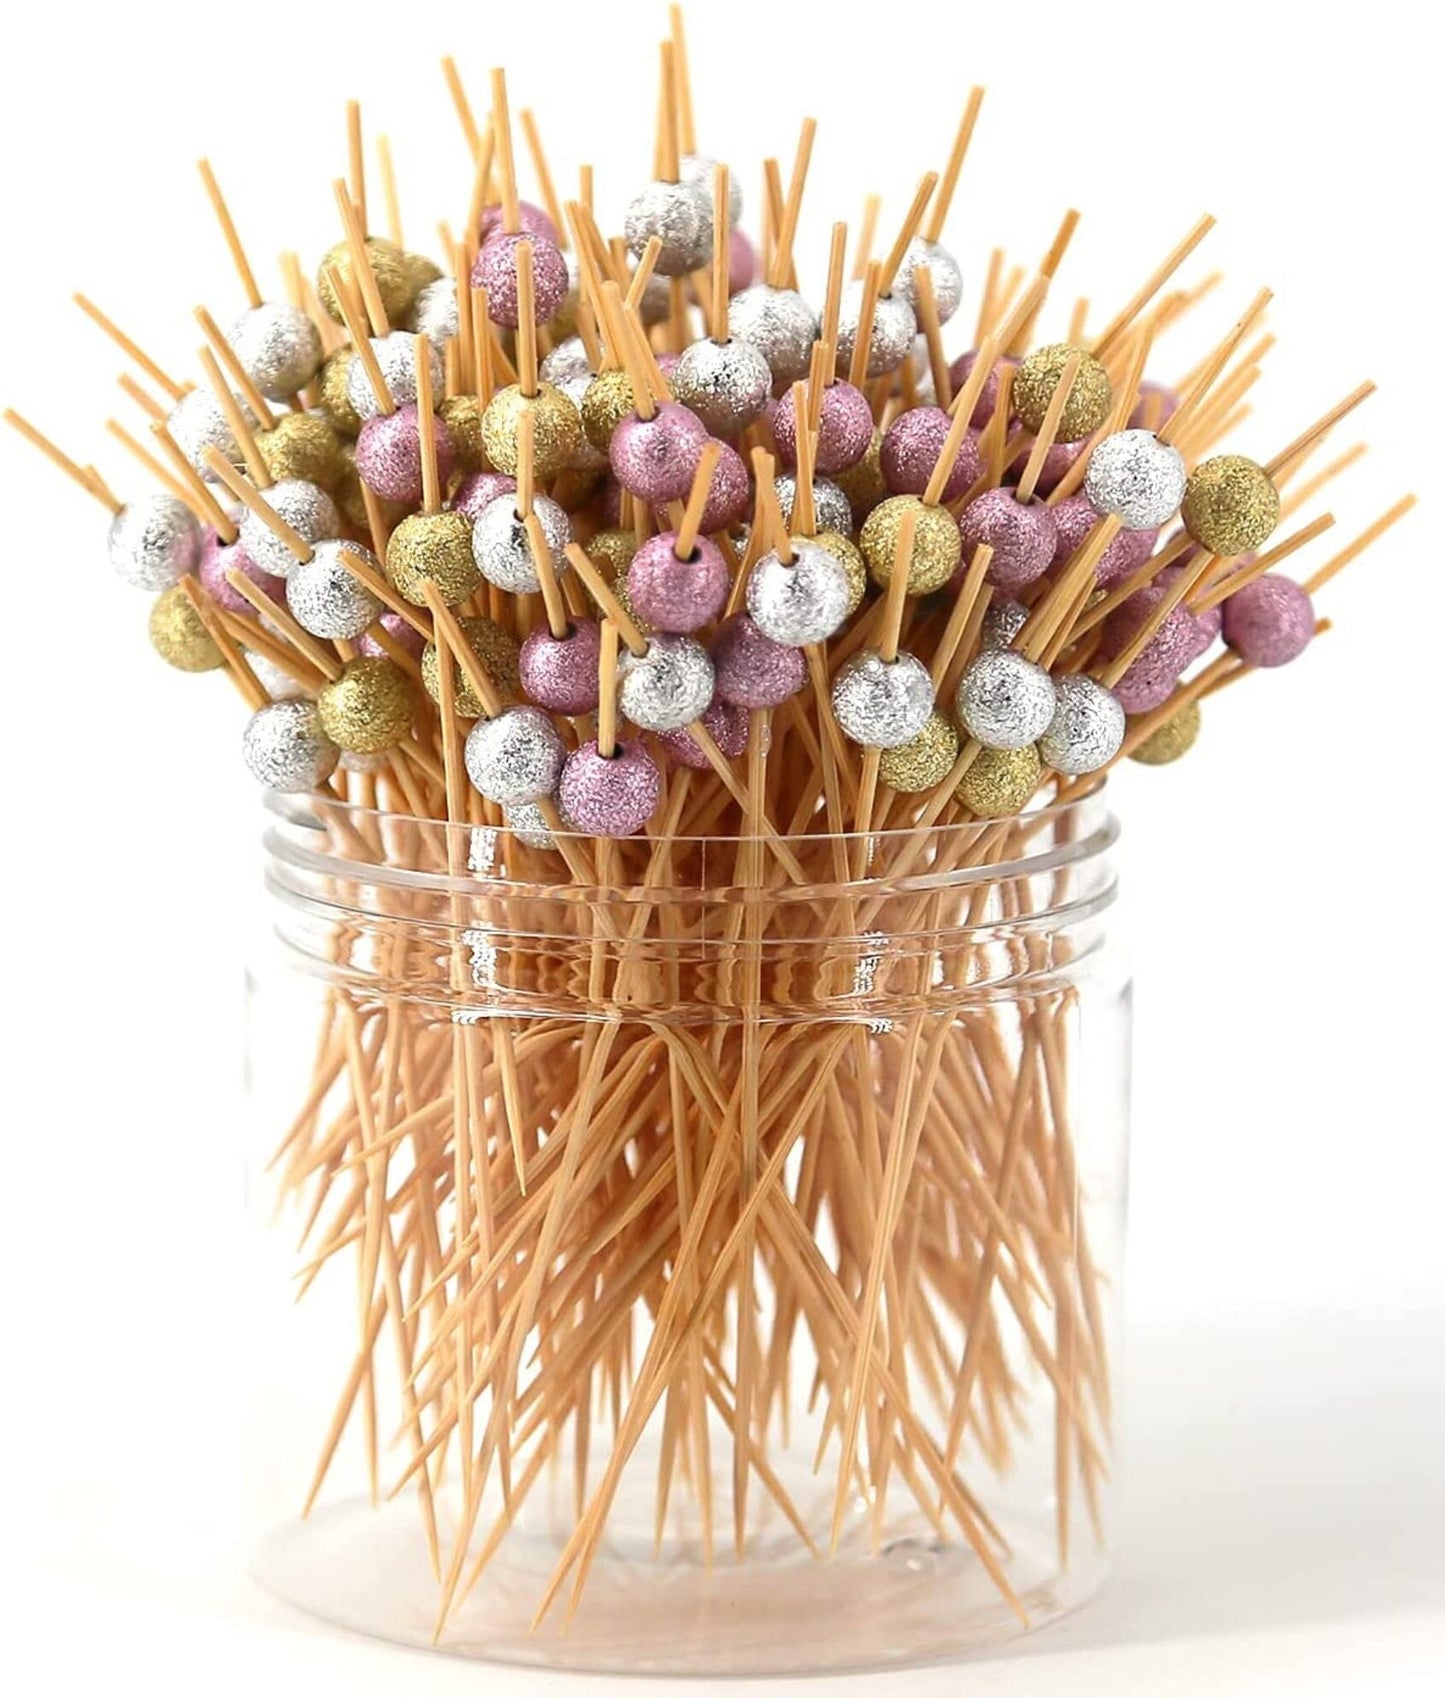 Assorted Style Charcuterie Toothpicks - Pink Flamingo, Stetsonia Cactus, and More! Fancy Toothpicks for Charcuterie and Appetizers - Wedding, Buffet, Shower - Elegant Party Decor